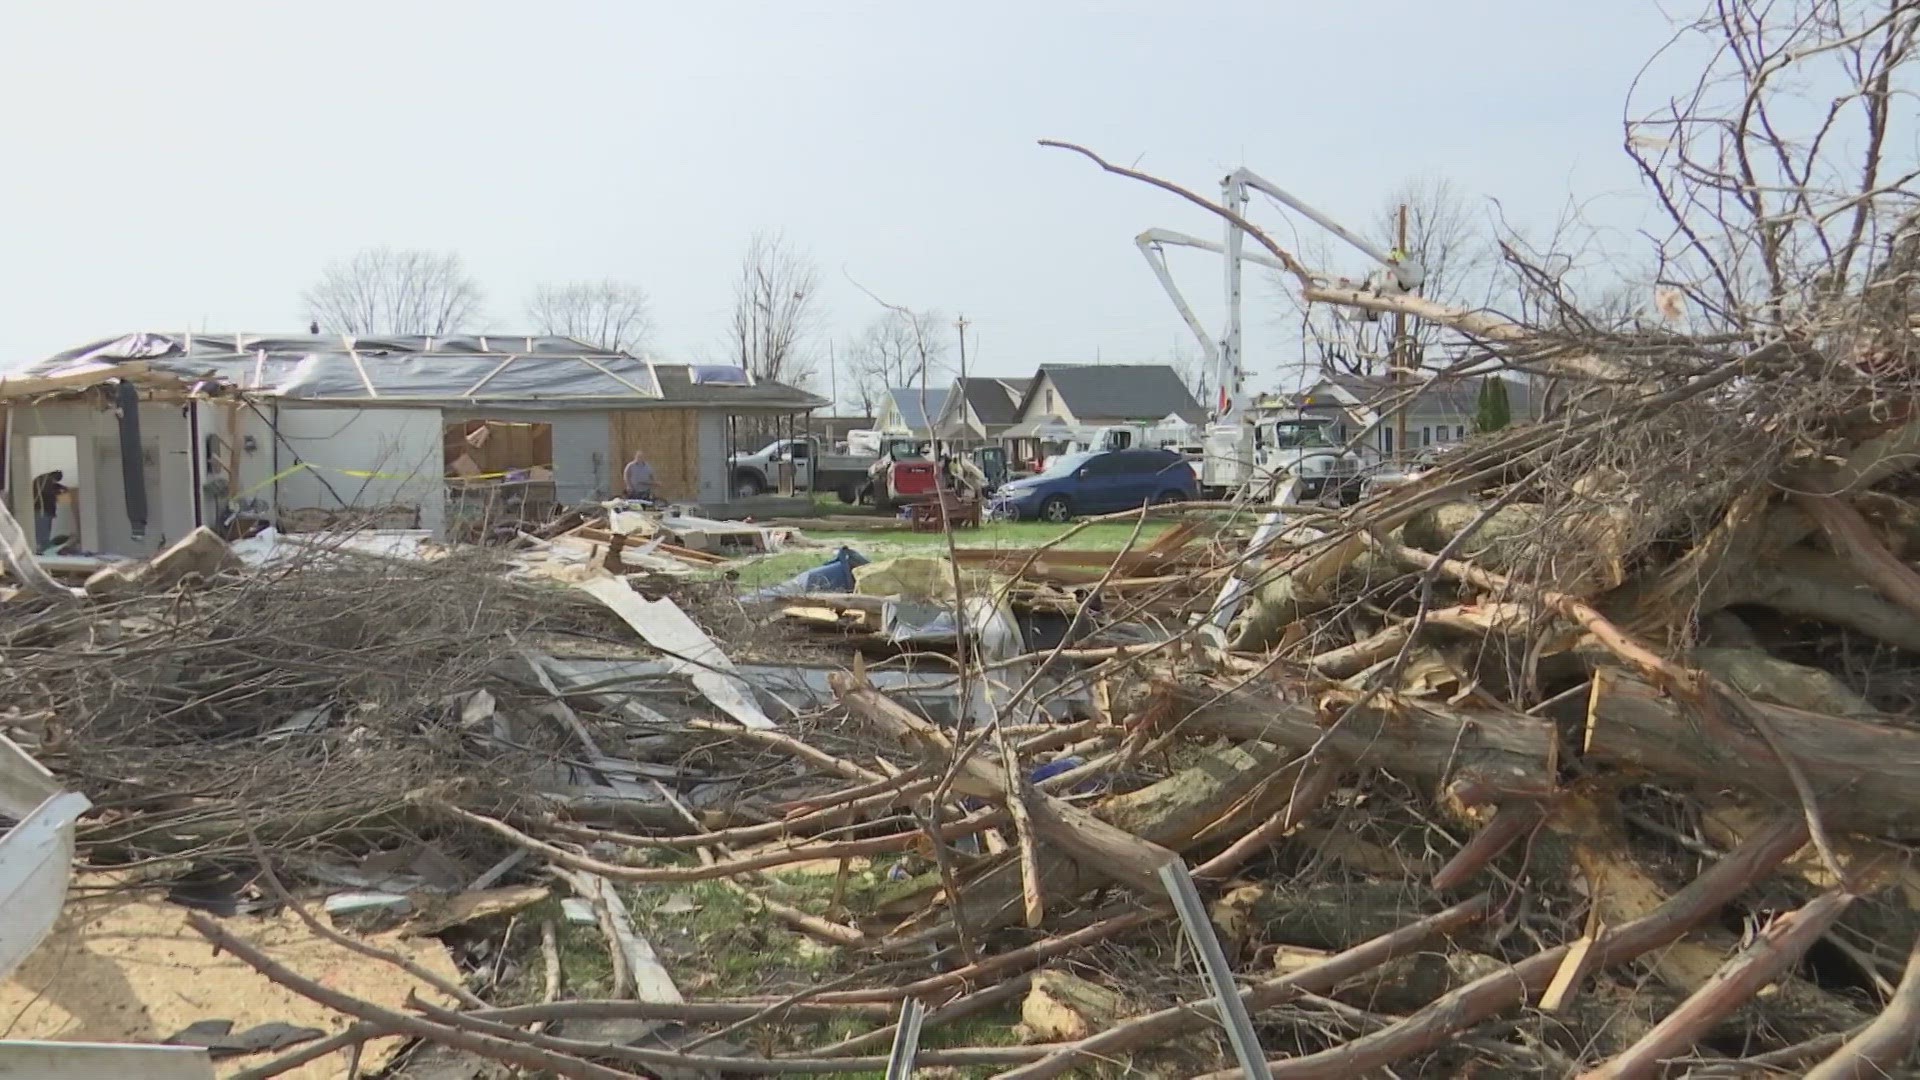 If you applied for federal assistance from the March 31 tornadoes, you'll want to keep an eye on your mailbox.